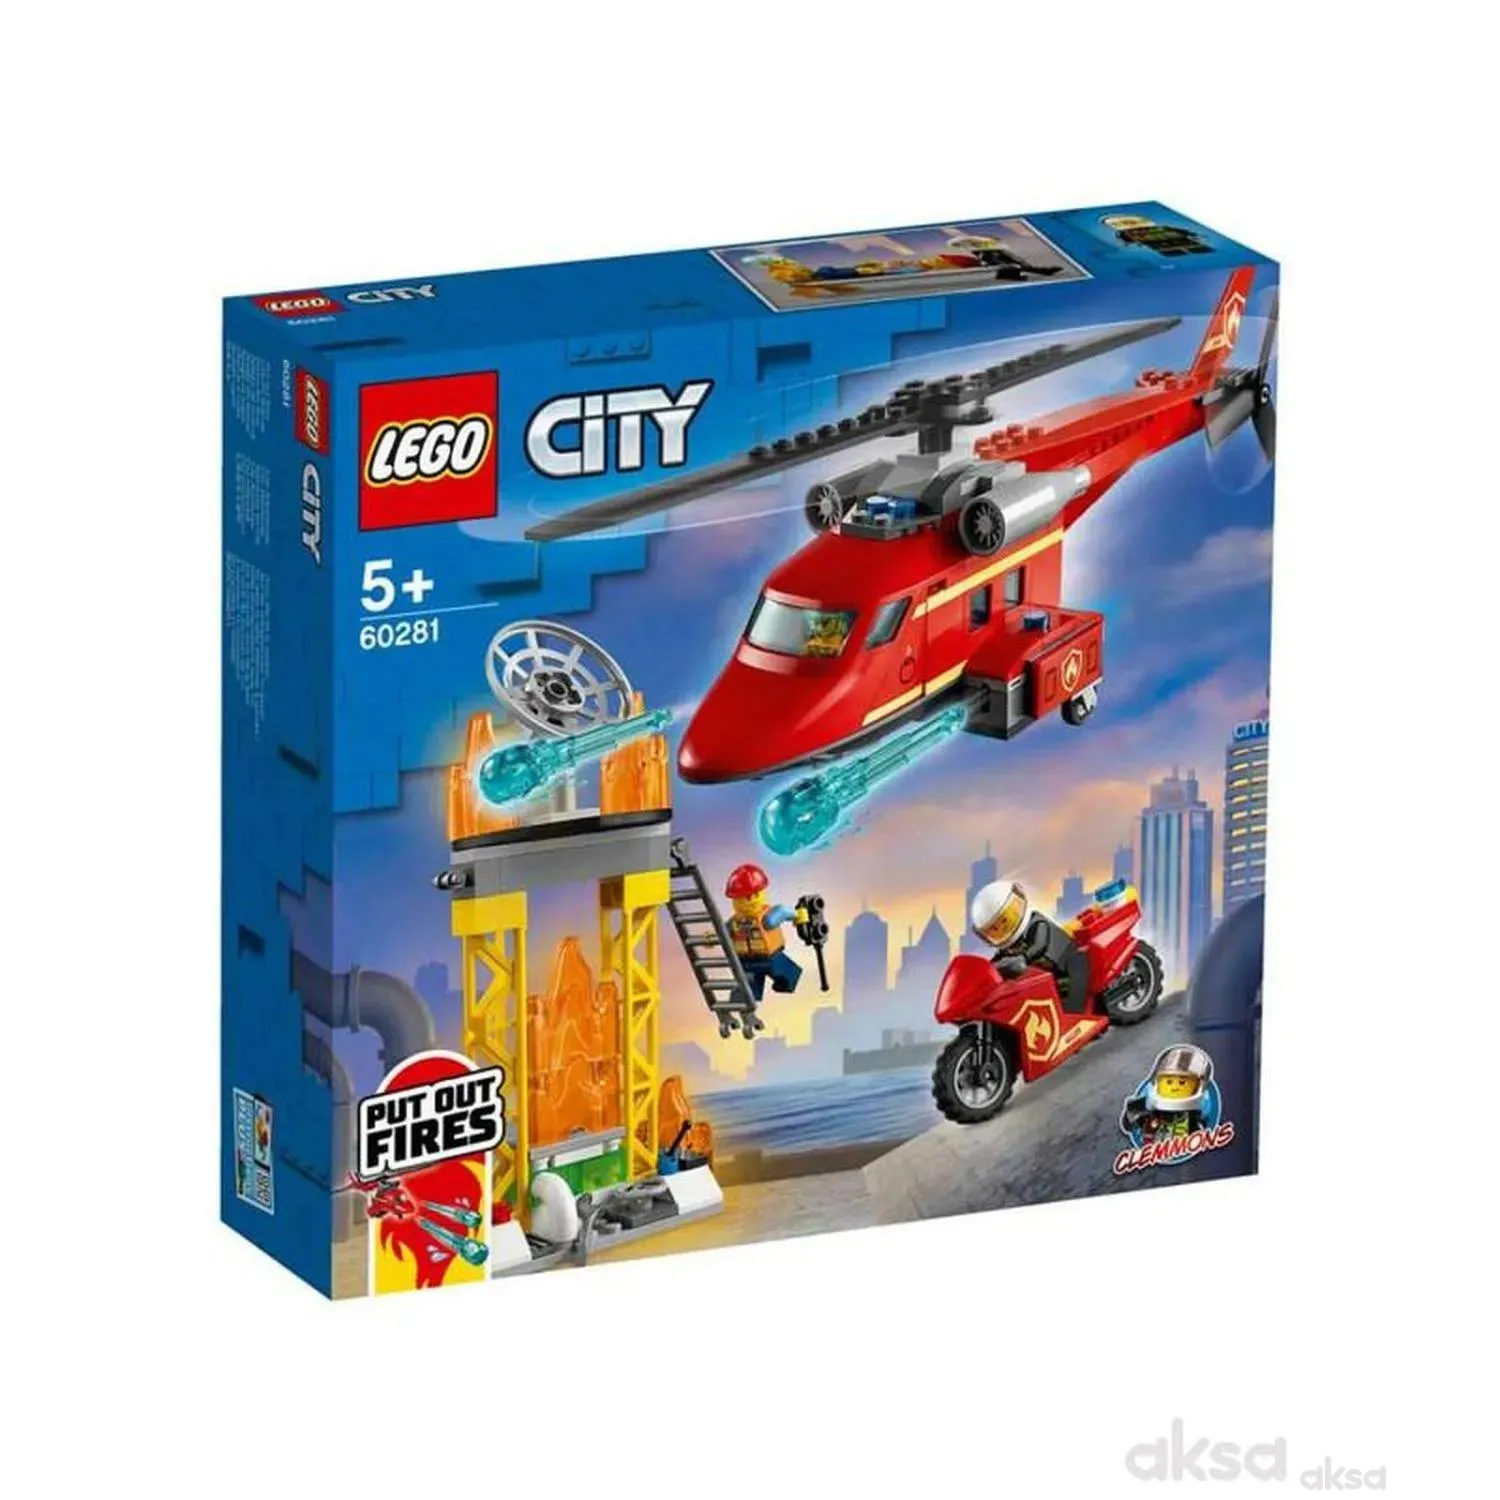 Lego City fire rescue helicopter 